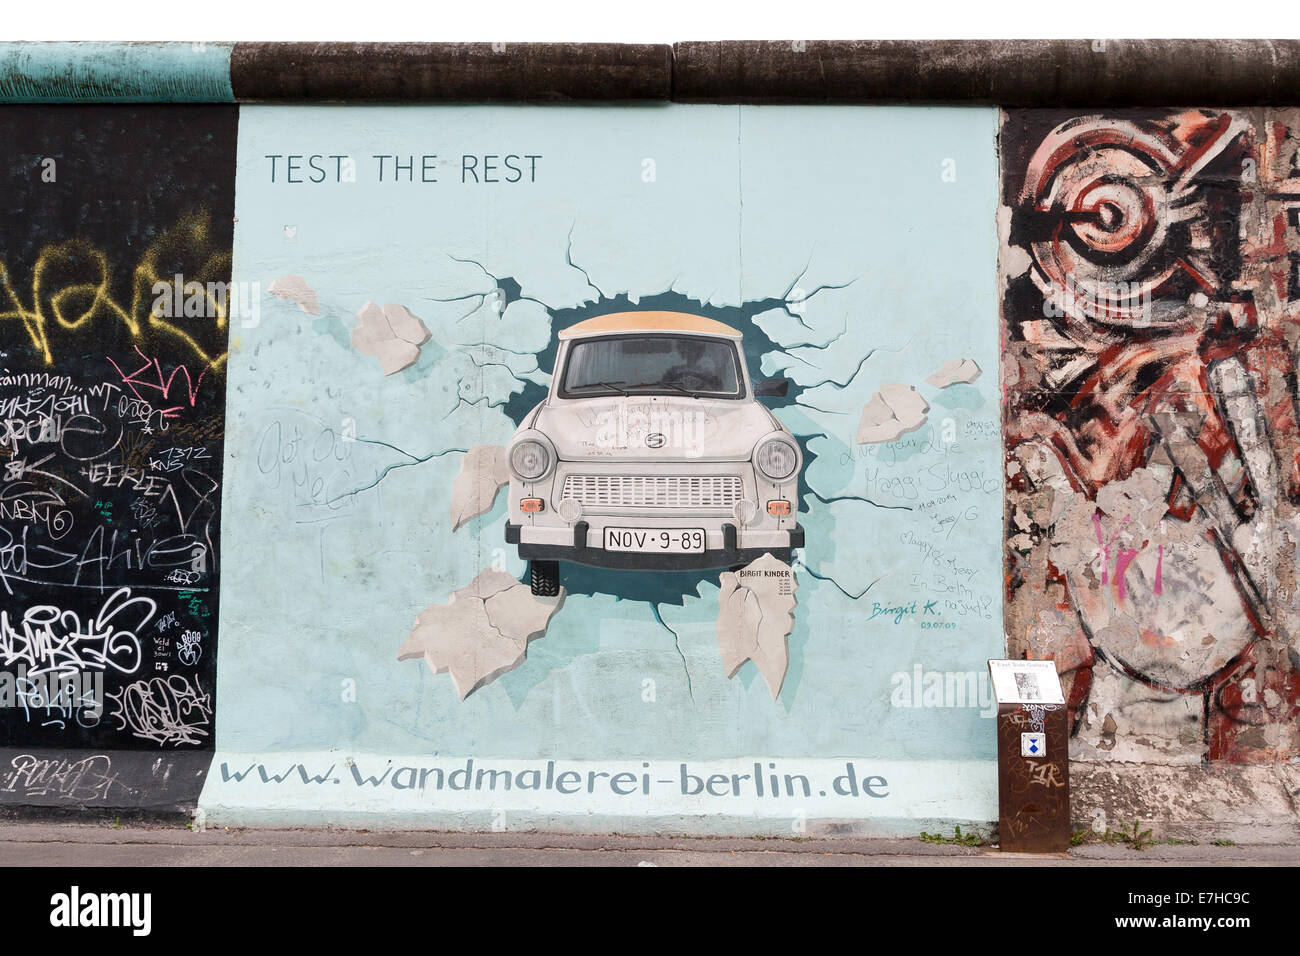 The East Side Gallery, Berlin 2014 Stock Photo